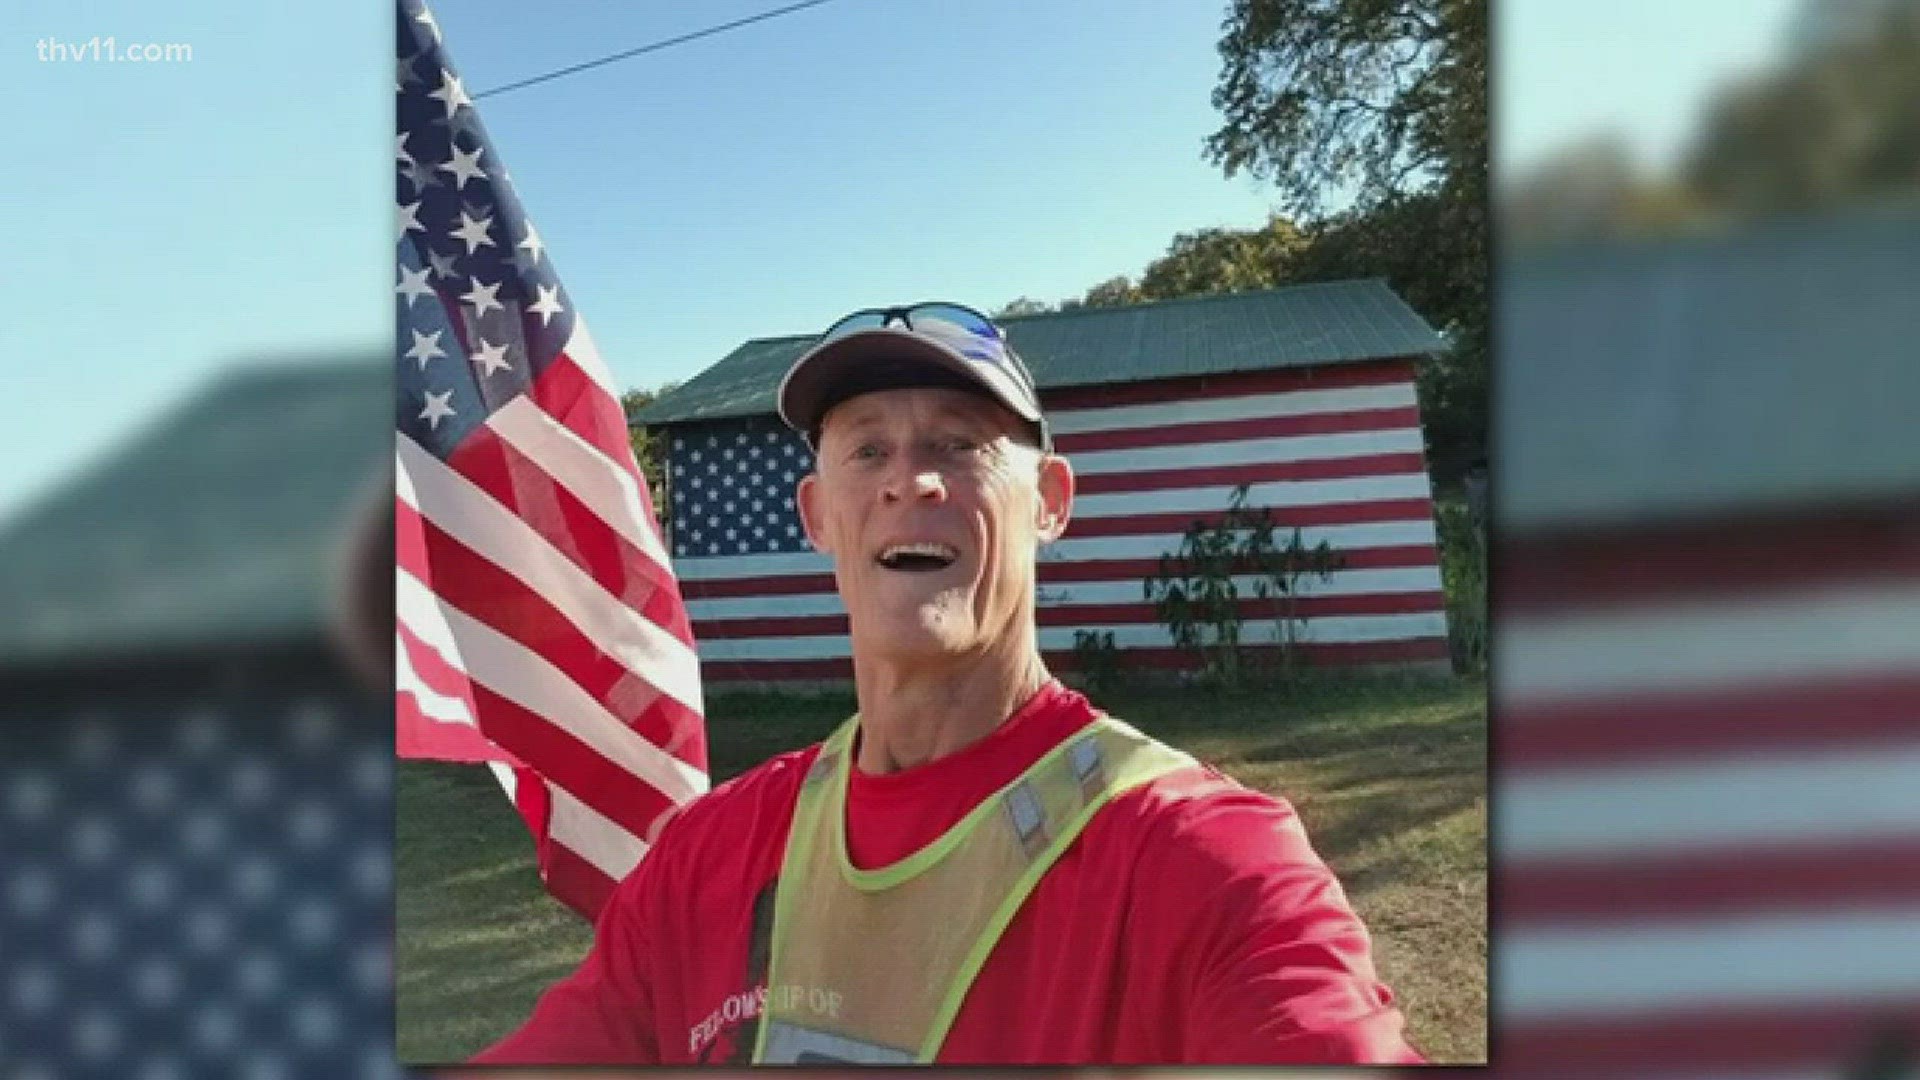 Dan Ring, 61, of Paragould ran across the state, 25 miles per day for 11 days to honor our fallen military and first responders.